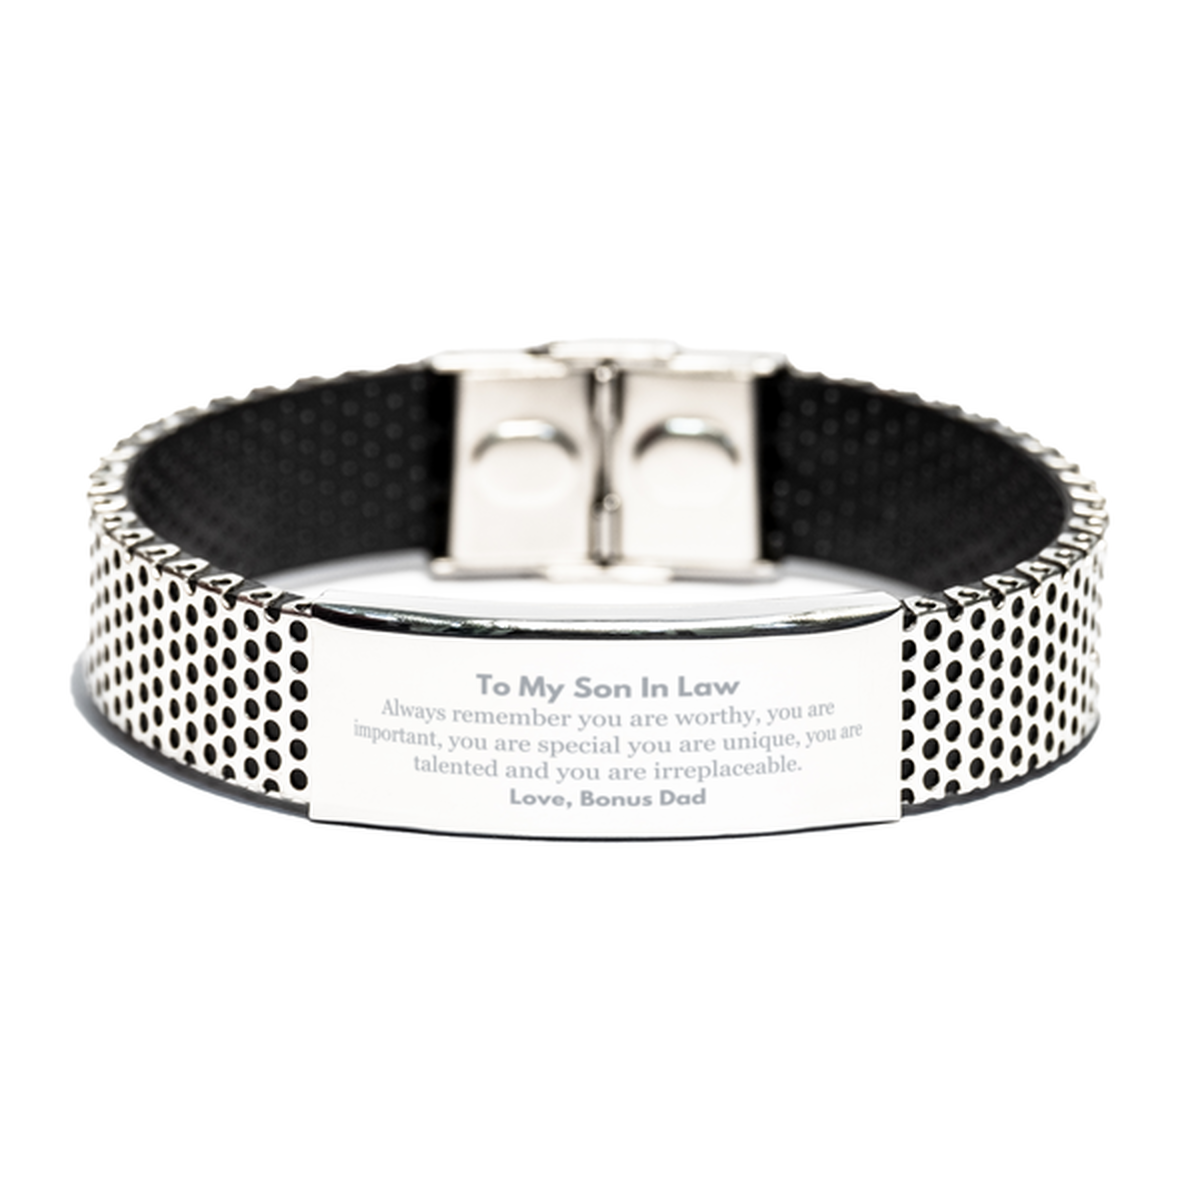 Son In Law Birthday Gifts from Bonus Dad, Inspirational Stainless Steel Bracelet for Son In Law Christmas Graduation Gifts for Son In Law Always remember you are worthy, you are important. Love, Bonus Dad